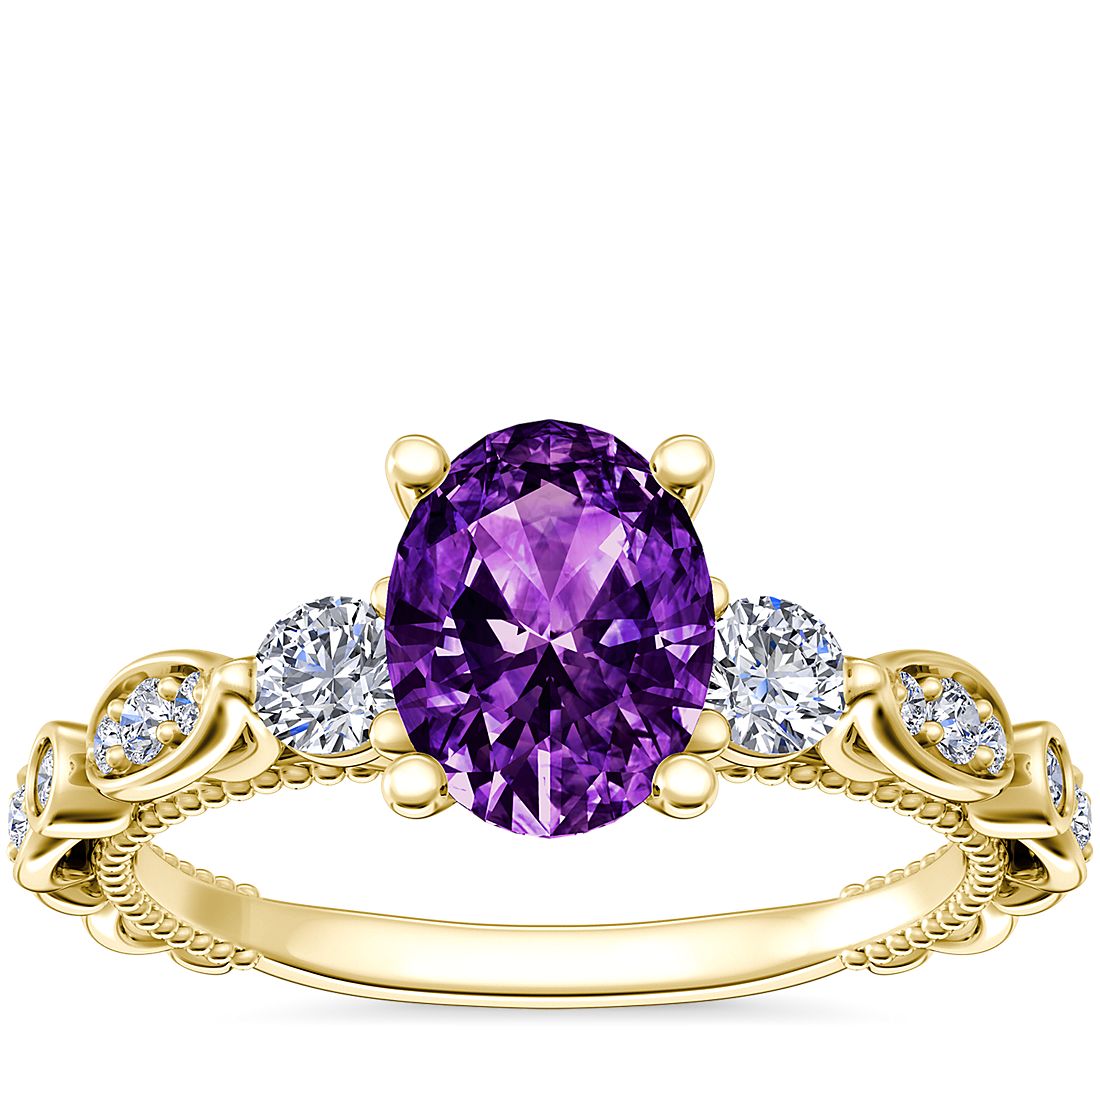 Floral Ellipse Diamond Cathedral Engagement Ring with Oval Amethyst in 14k Yellow Gold (8x6mm)